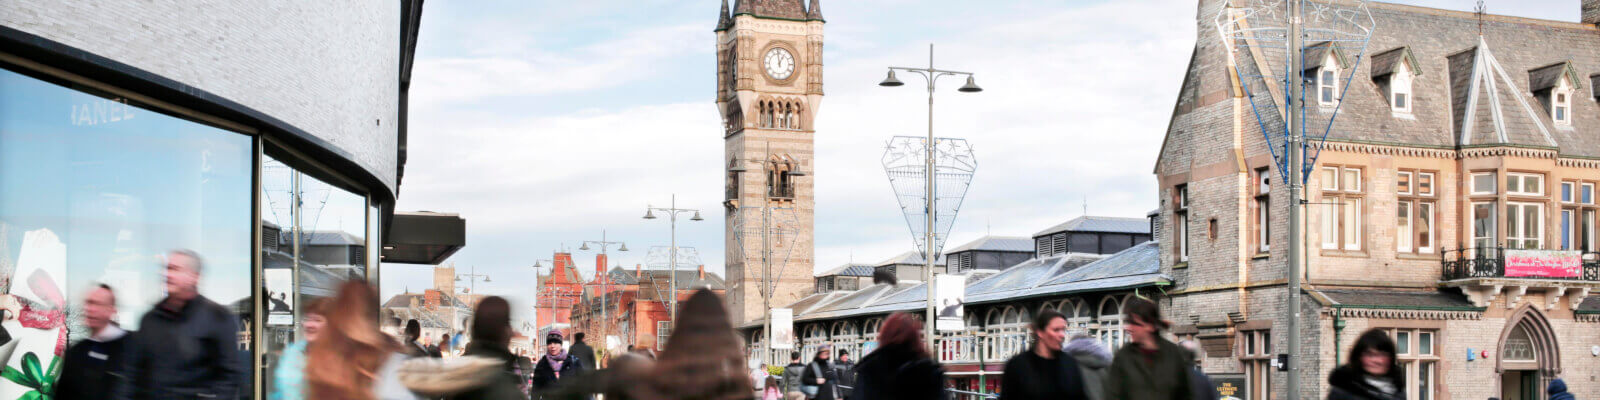 Shoppers in Darlington town centre with town clock and indoor market in background